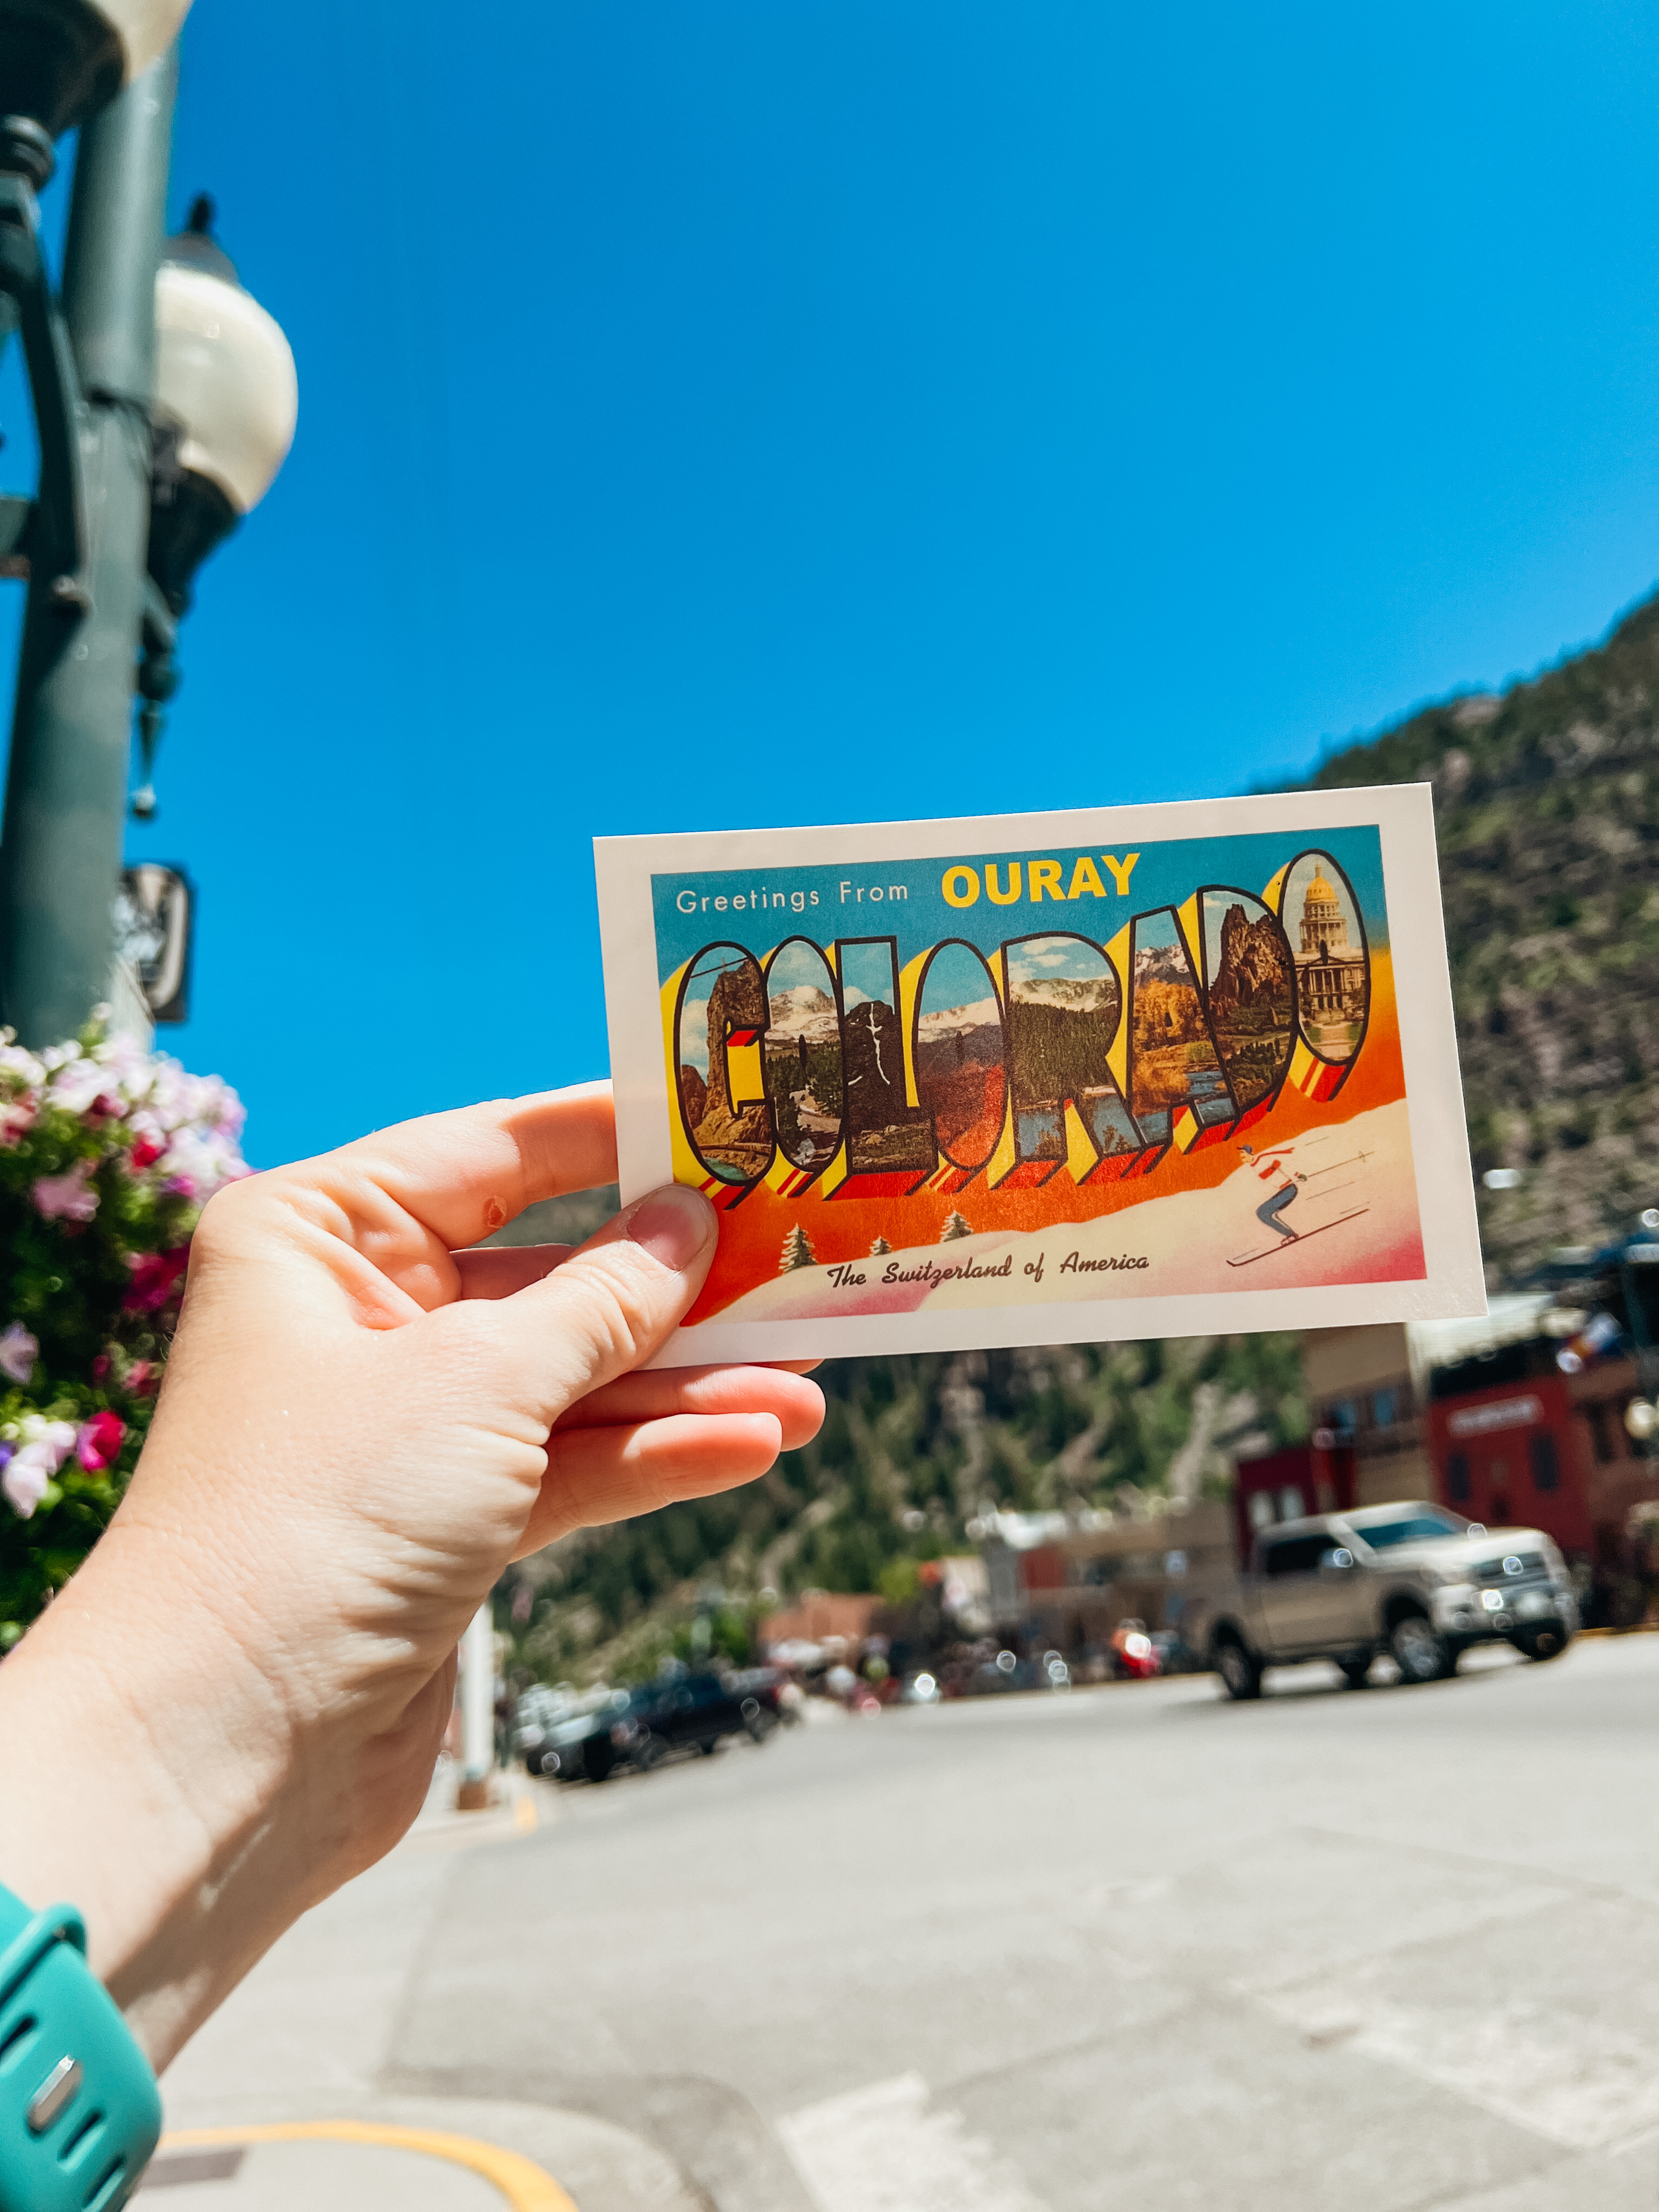 The Ultimate Guide to Ouray, Colorado